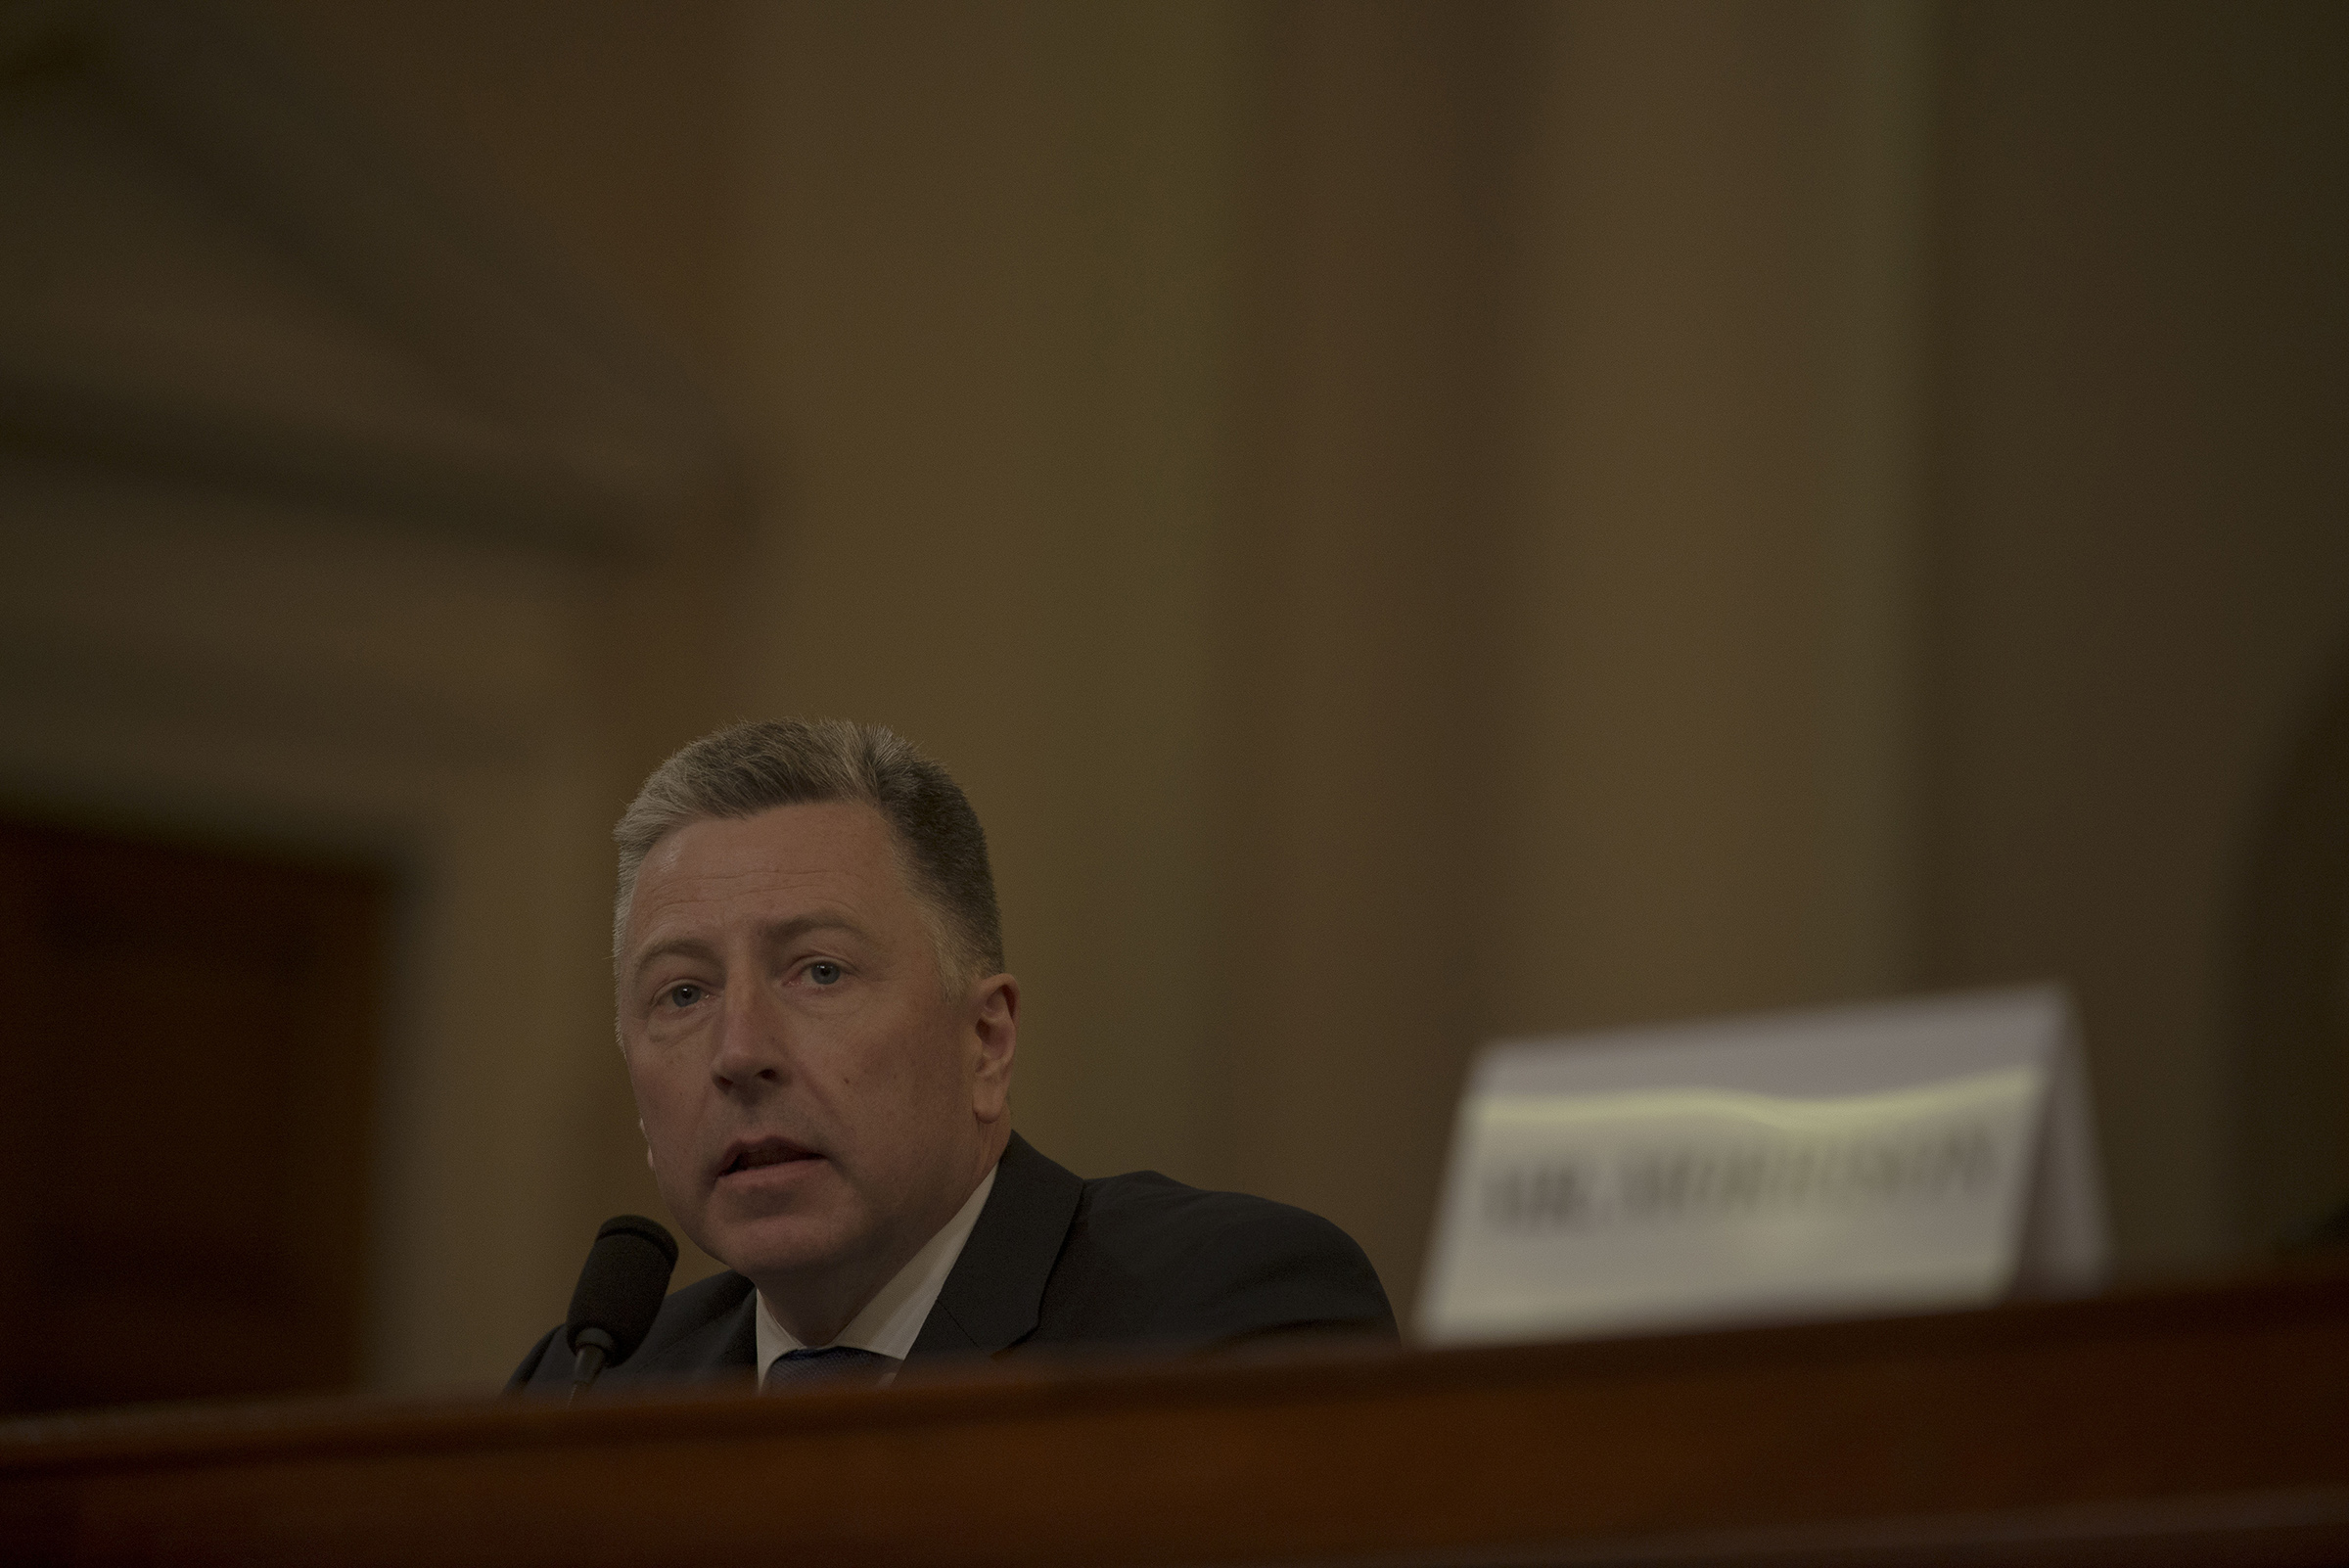 11/19/19, Capitol Hill, Washington, D.C. Ambassador Kurt Volker testifies during the House Intelligence Committee hearing on the impeachment inquiry at the Longworth House Office building on Capitol Hill in Washington, D.C. on Nov. 19, 2019.Gabriella Demczuk / TIME